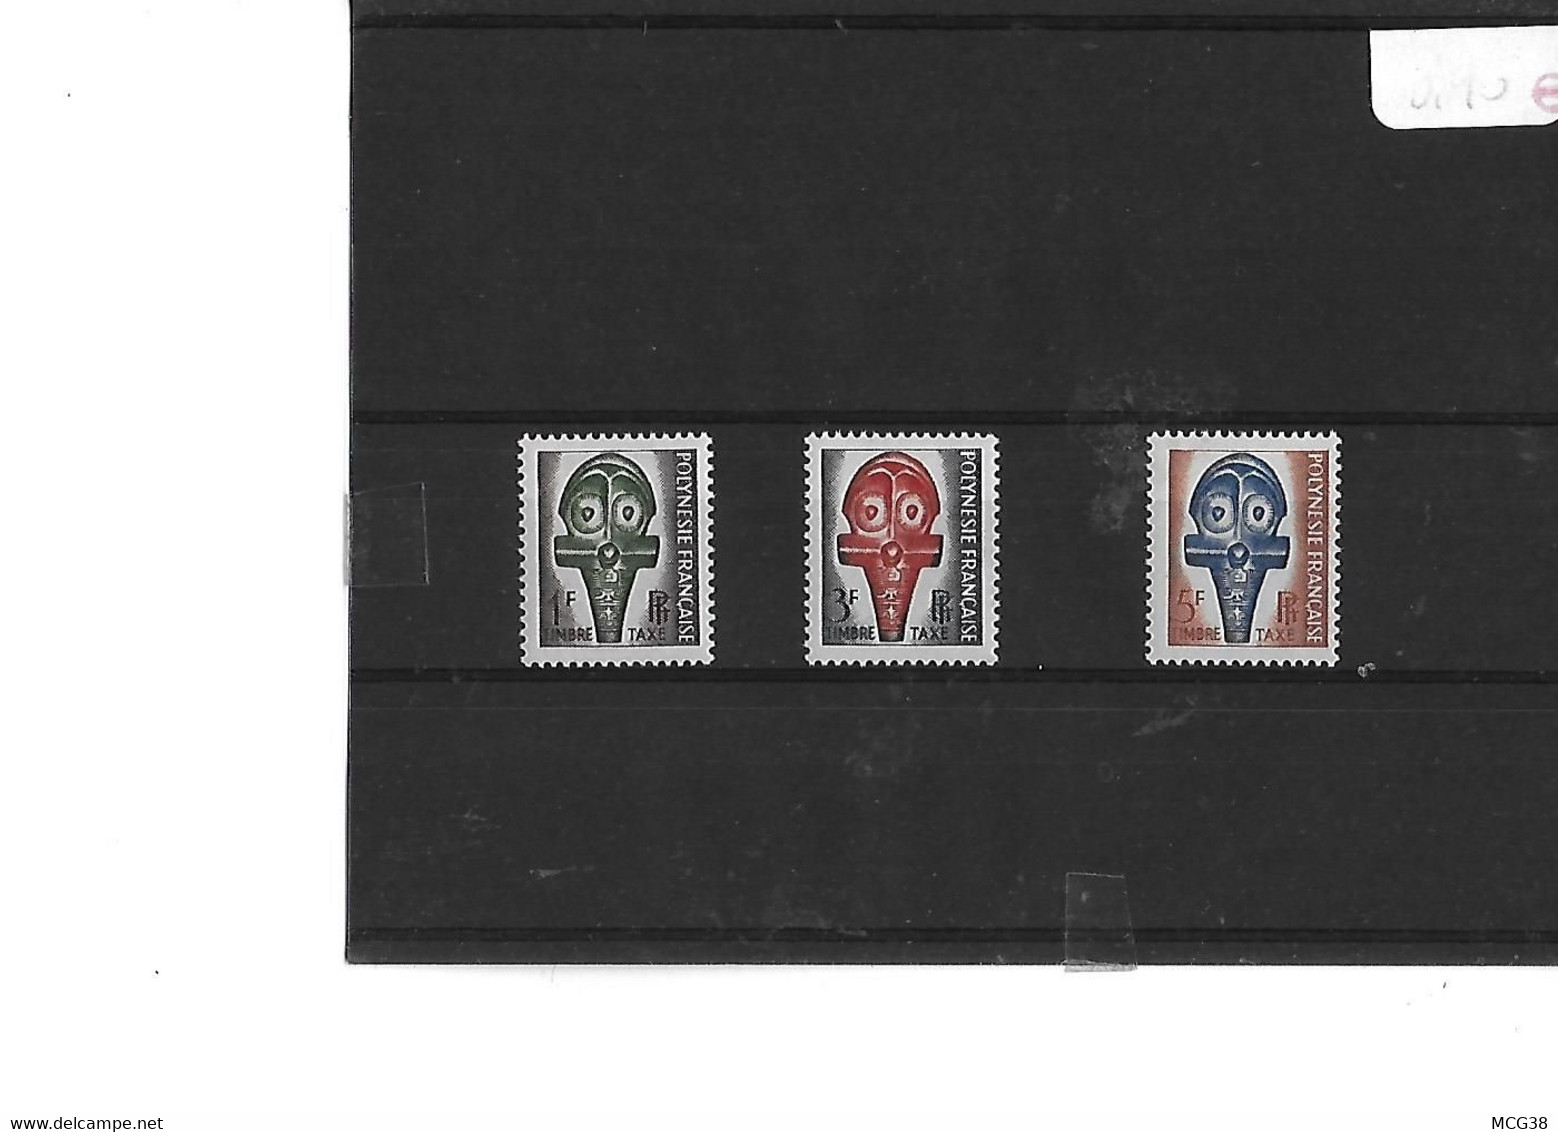 POLYNESIE  -  TIMBRES  TAXE  NEUFS  TRACE  CHARNIERE  -  SERIE   N°  1    à  3 - Strafport